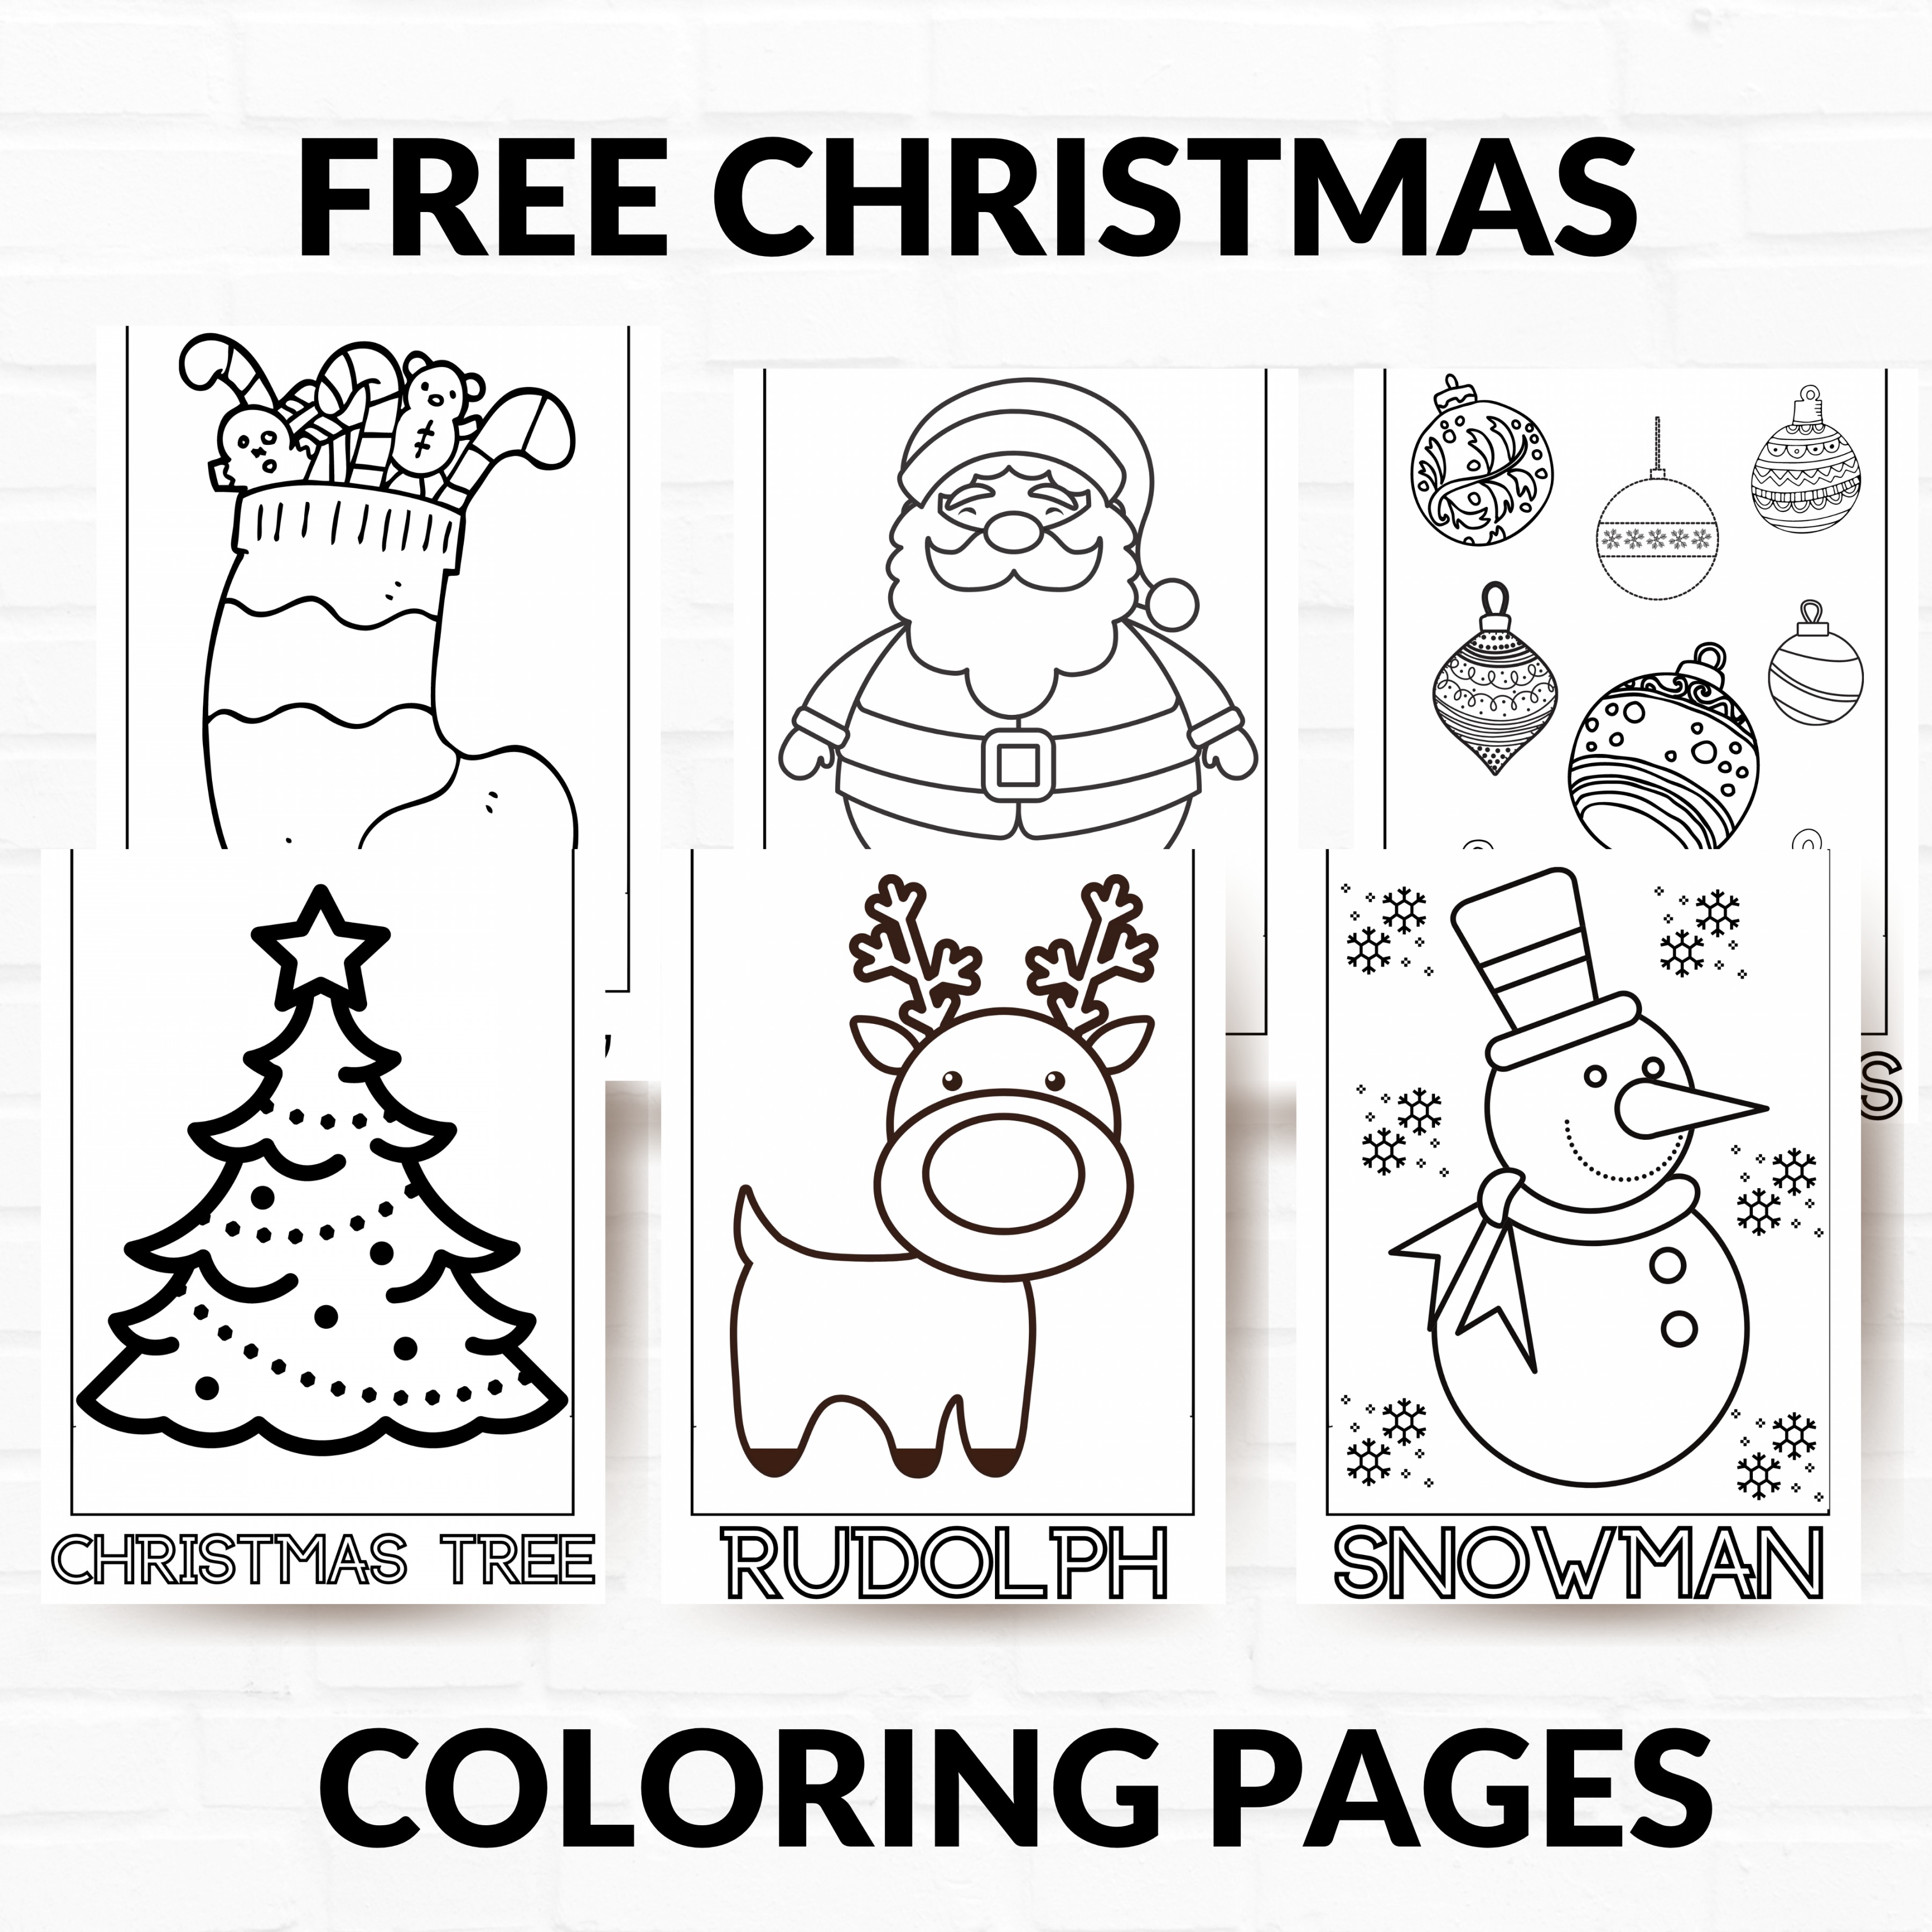 Christmas Free Printable Coloring Pages - Printable - Free Printable Christmas Coloring Pages - About a Mom